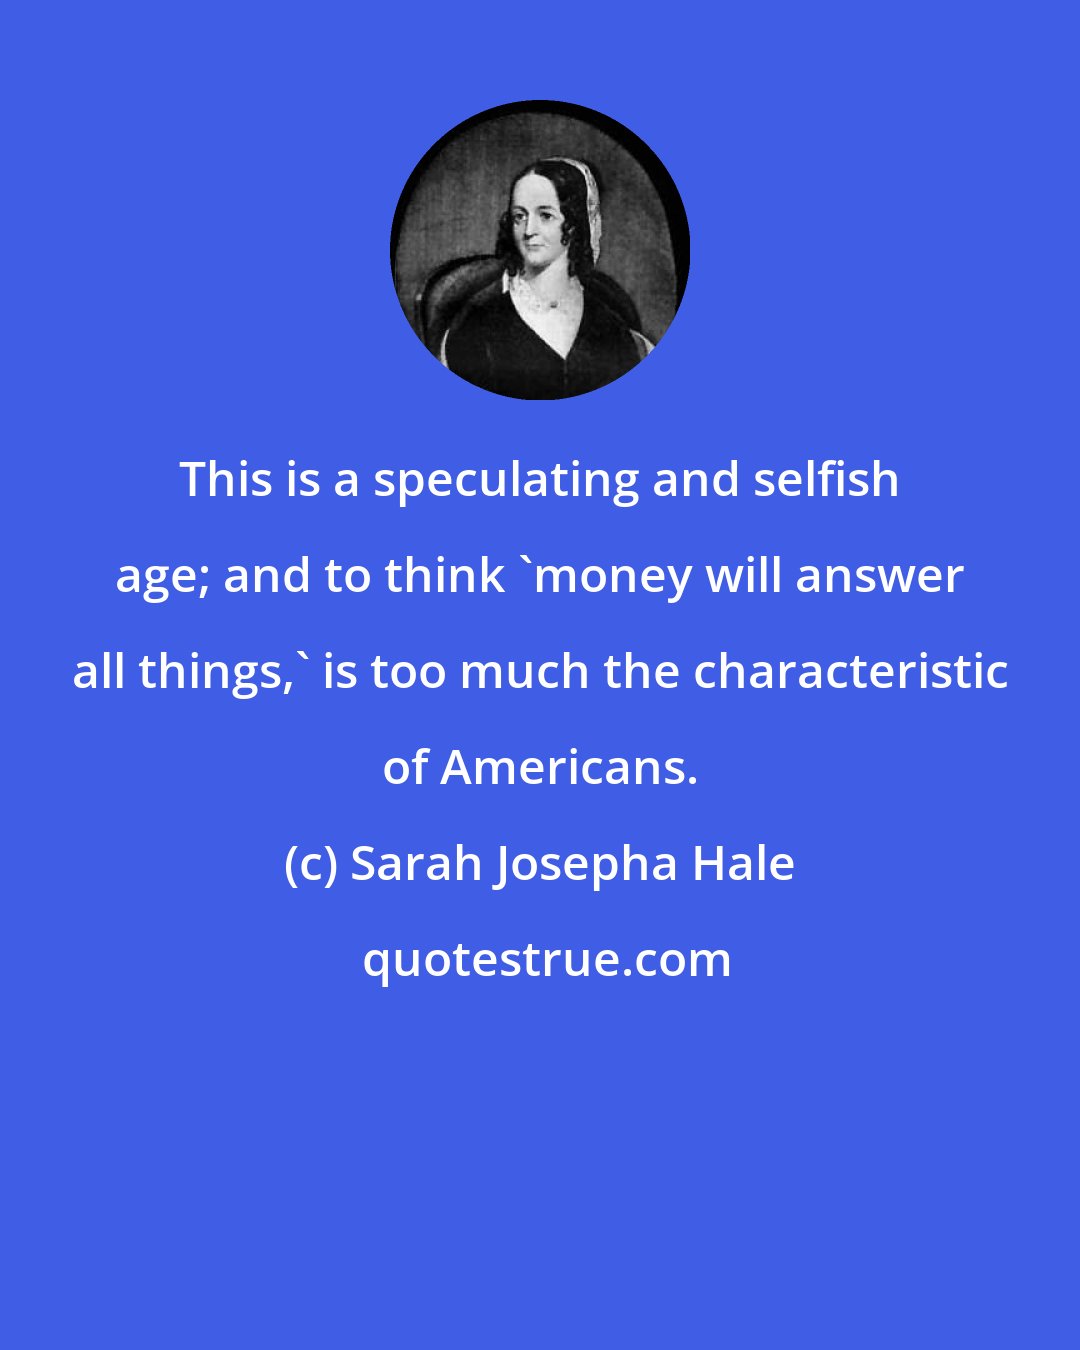 Sarah Josepha Hale: This is a speculating and selfish age; and to think 'money will answer all things,' is too much the characteristic of Americans.